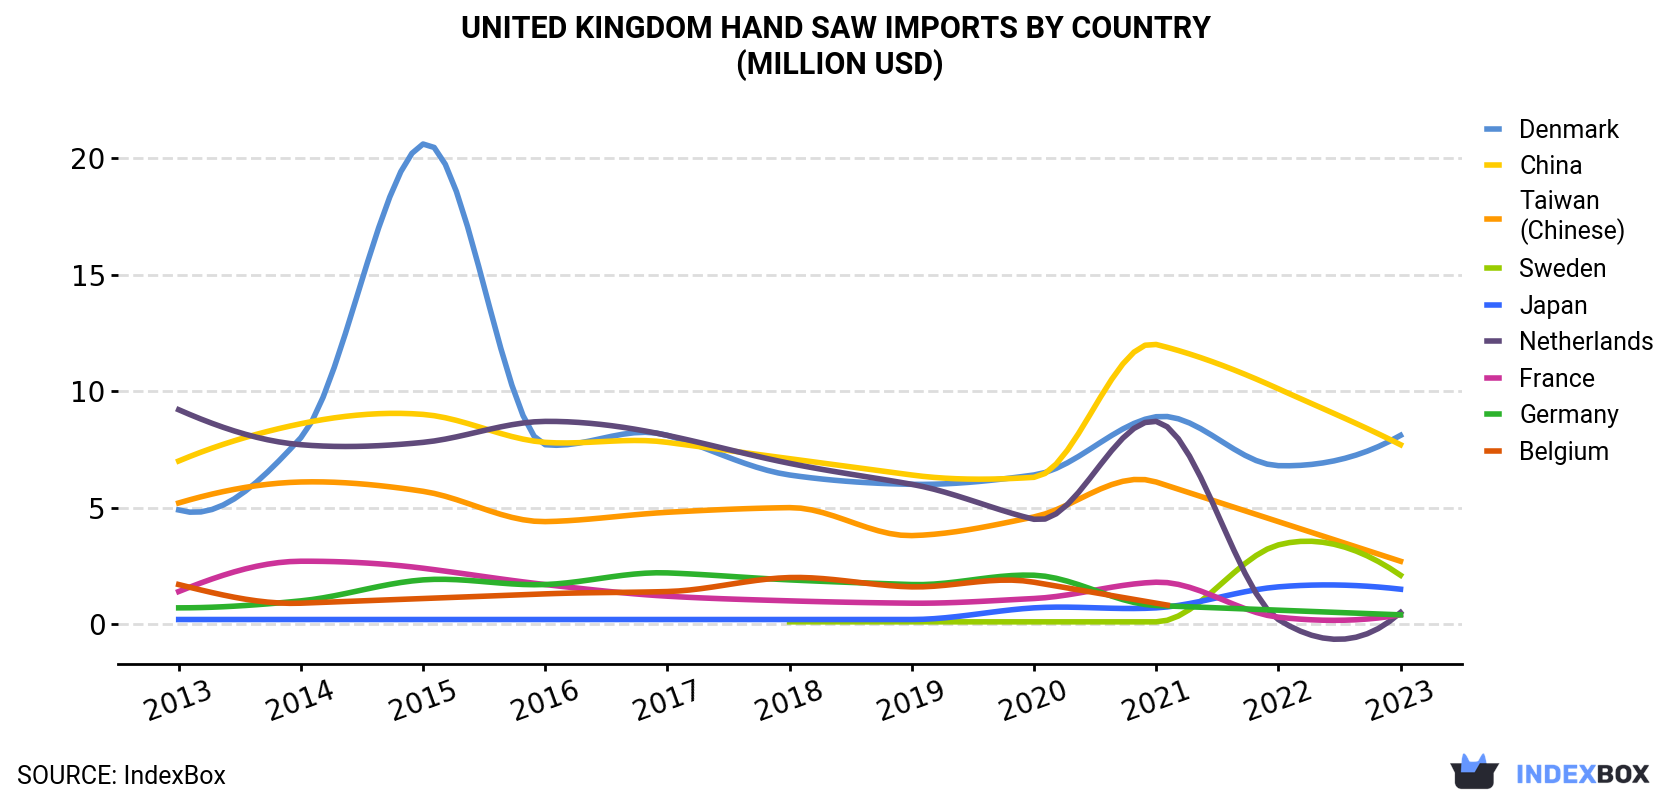 United Kingdom Hand Saw Imports By Country (Million USD)